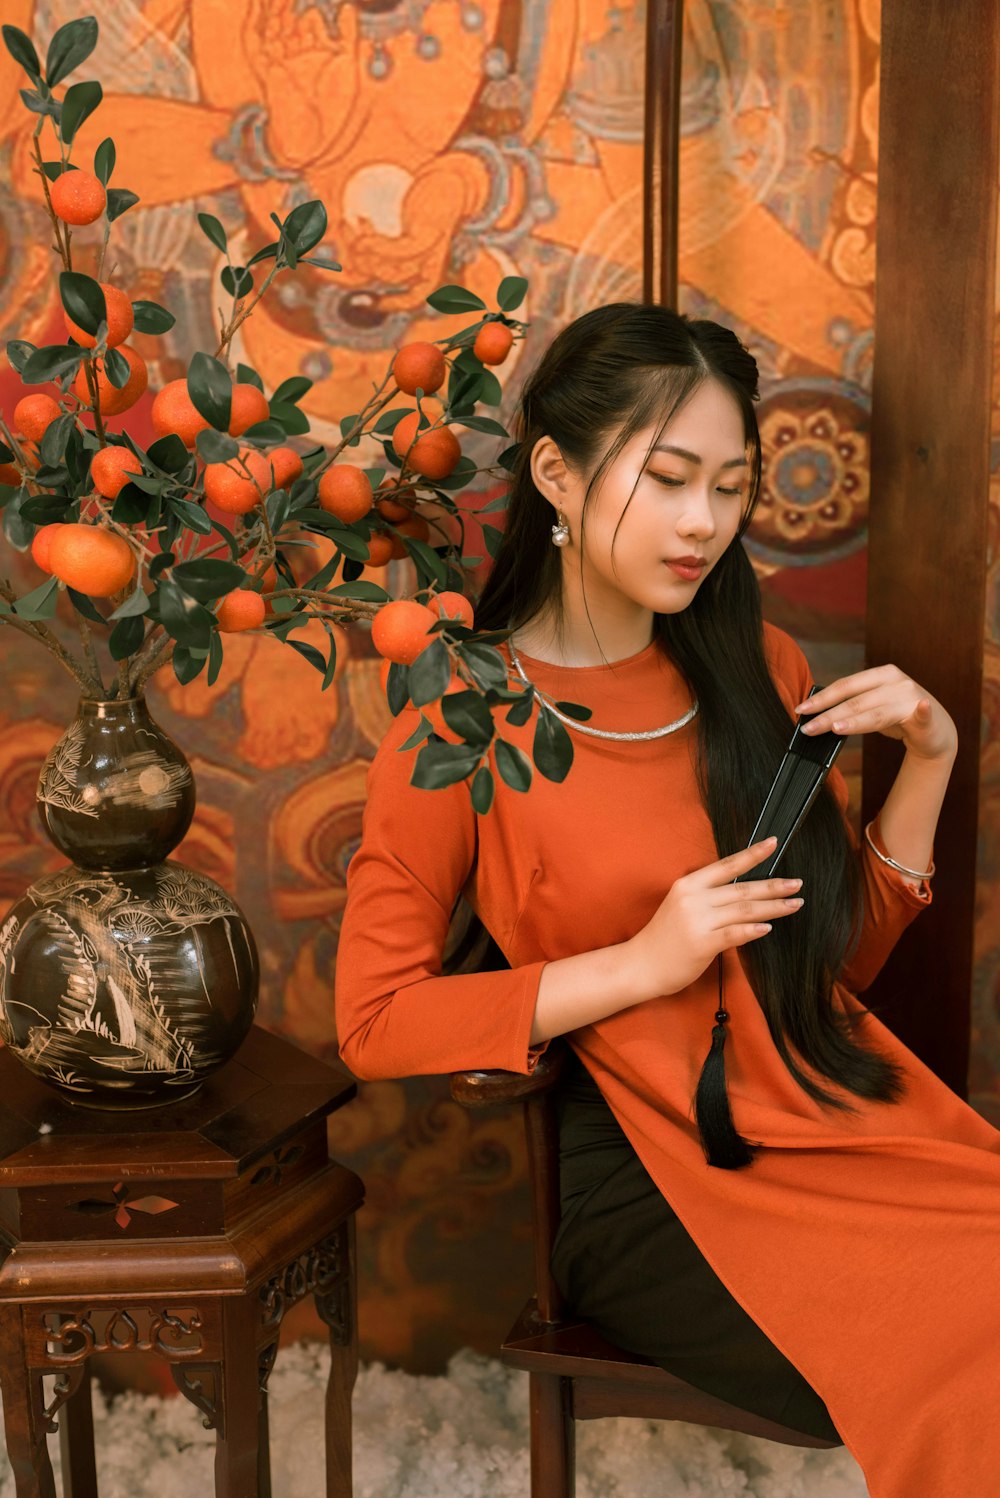 a woman sitting on a chair next to a vase of oranges